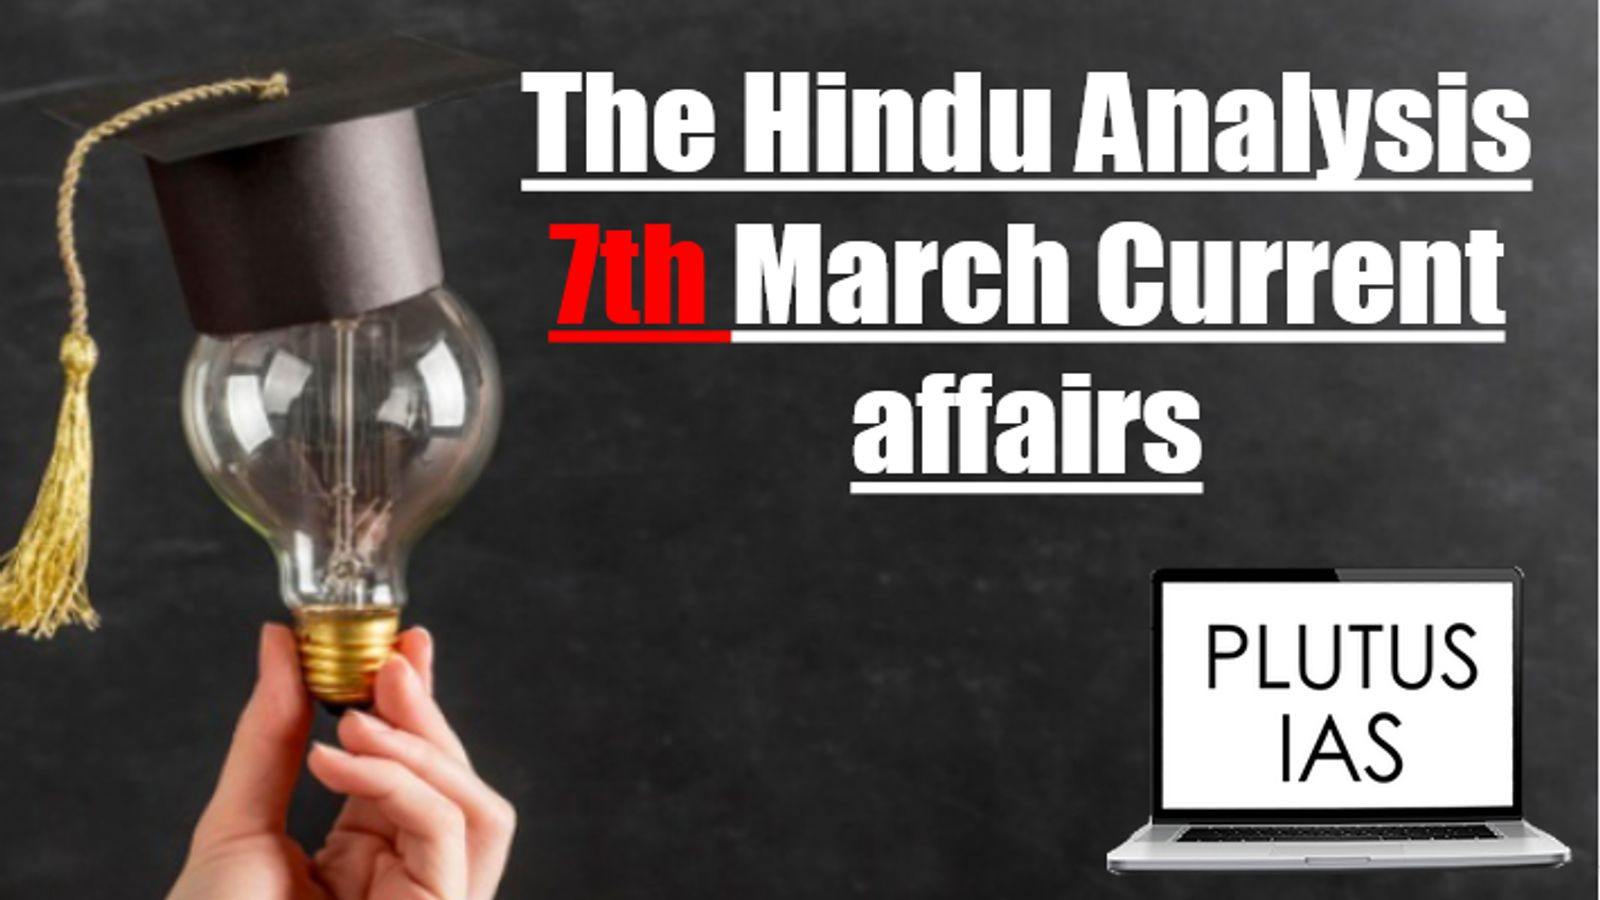 The Hindu Analysis 7th March Current Affairs